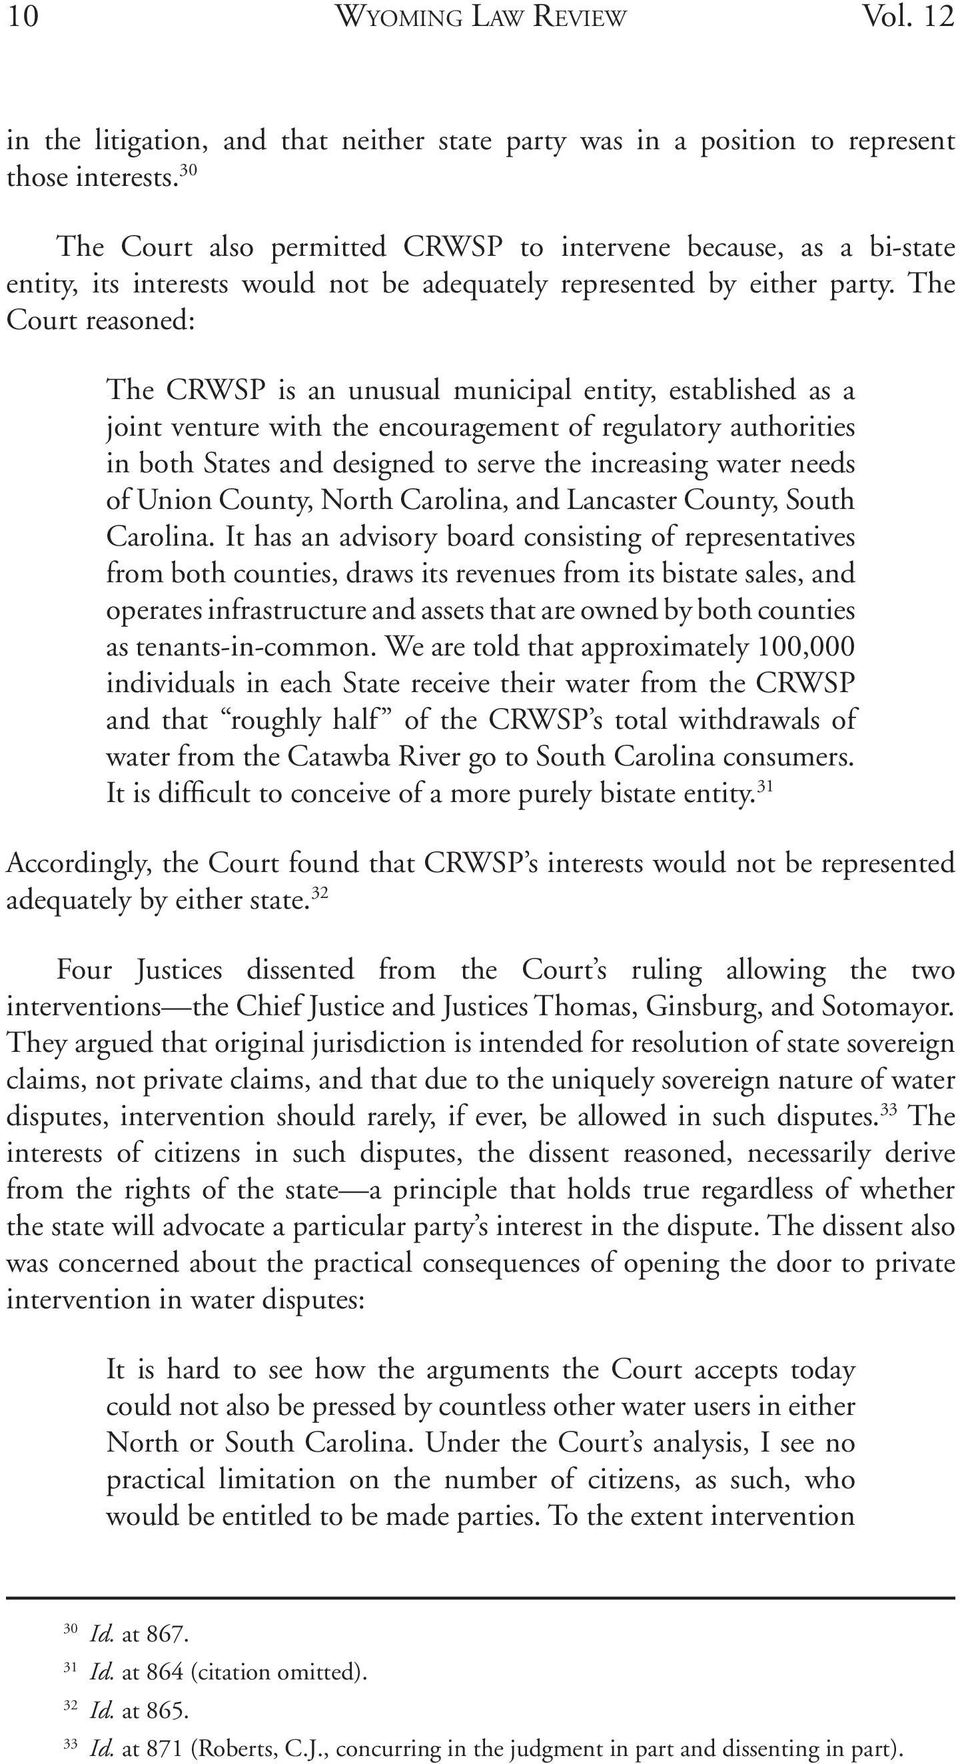 The Court reasoned: The CRWSP is an unusual municipal entity, established as a joint venture with the encouragement of regulatory authorities in both States and designed to serve the increasing water